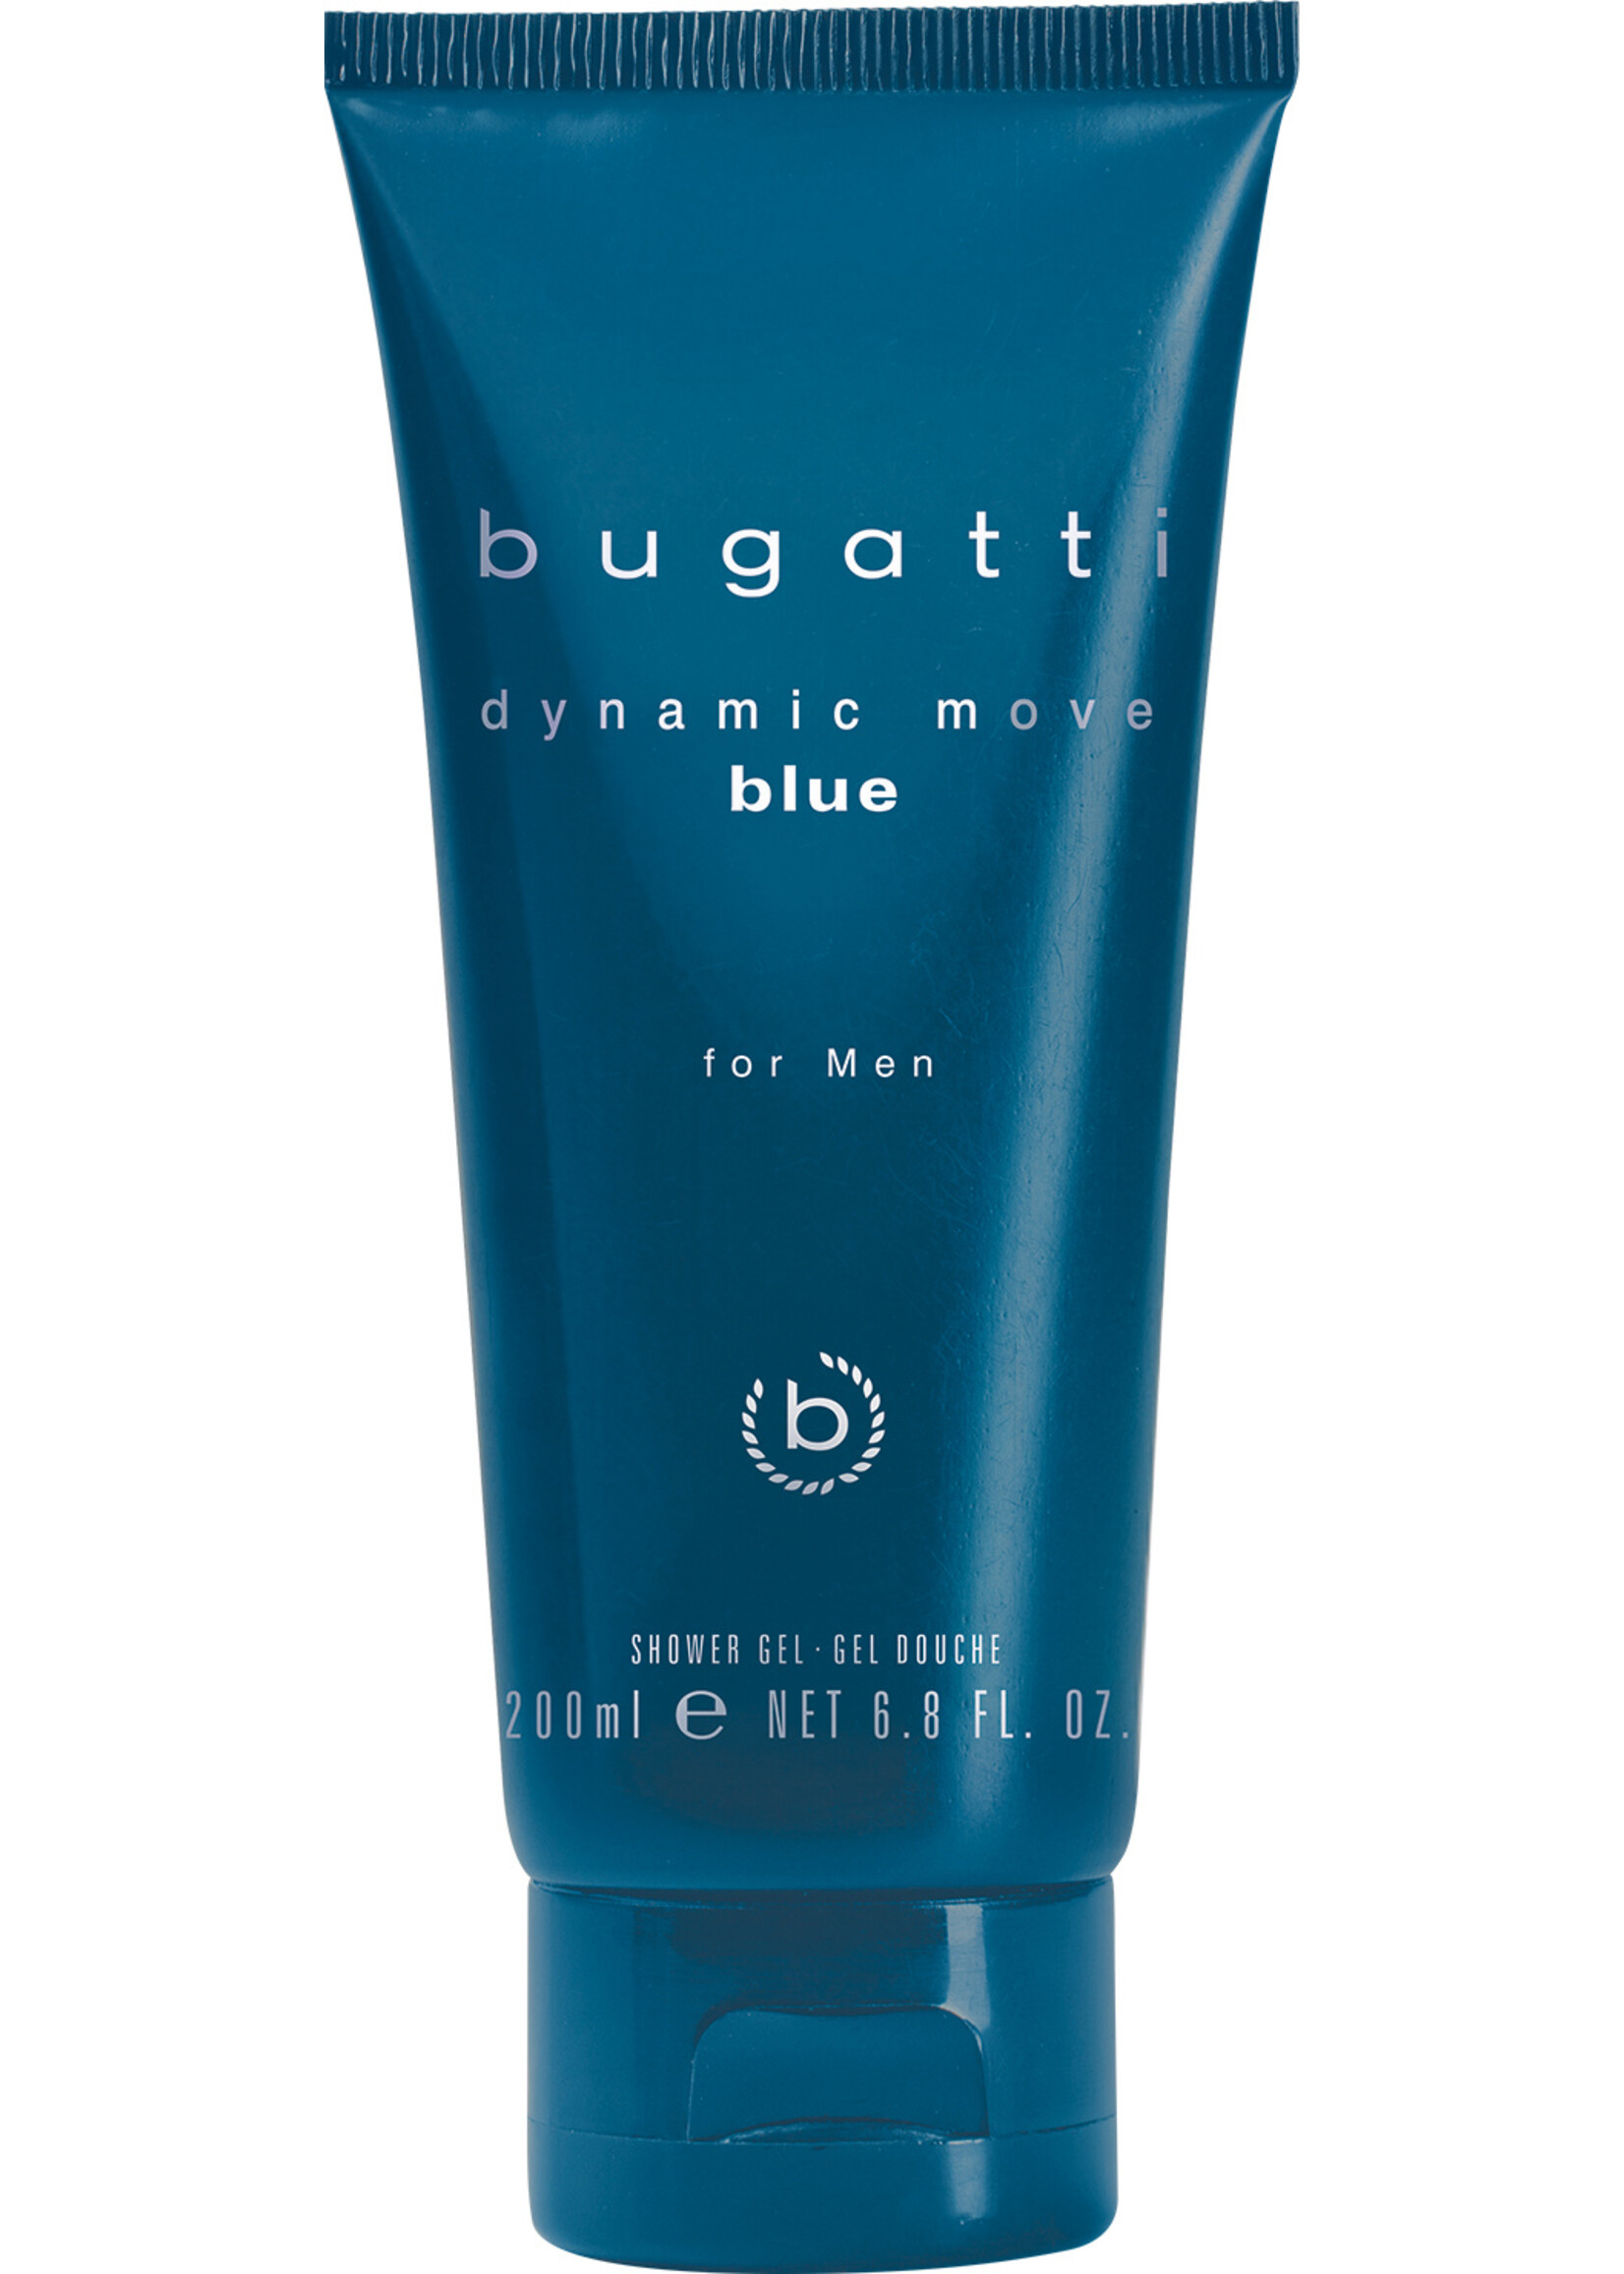 Dynamic Move Blue Giftset by - Marie-Rose Parfumerie Bugatti PARFUMERIE parfums MARIE ROSE 